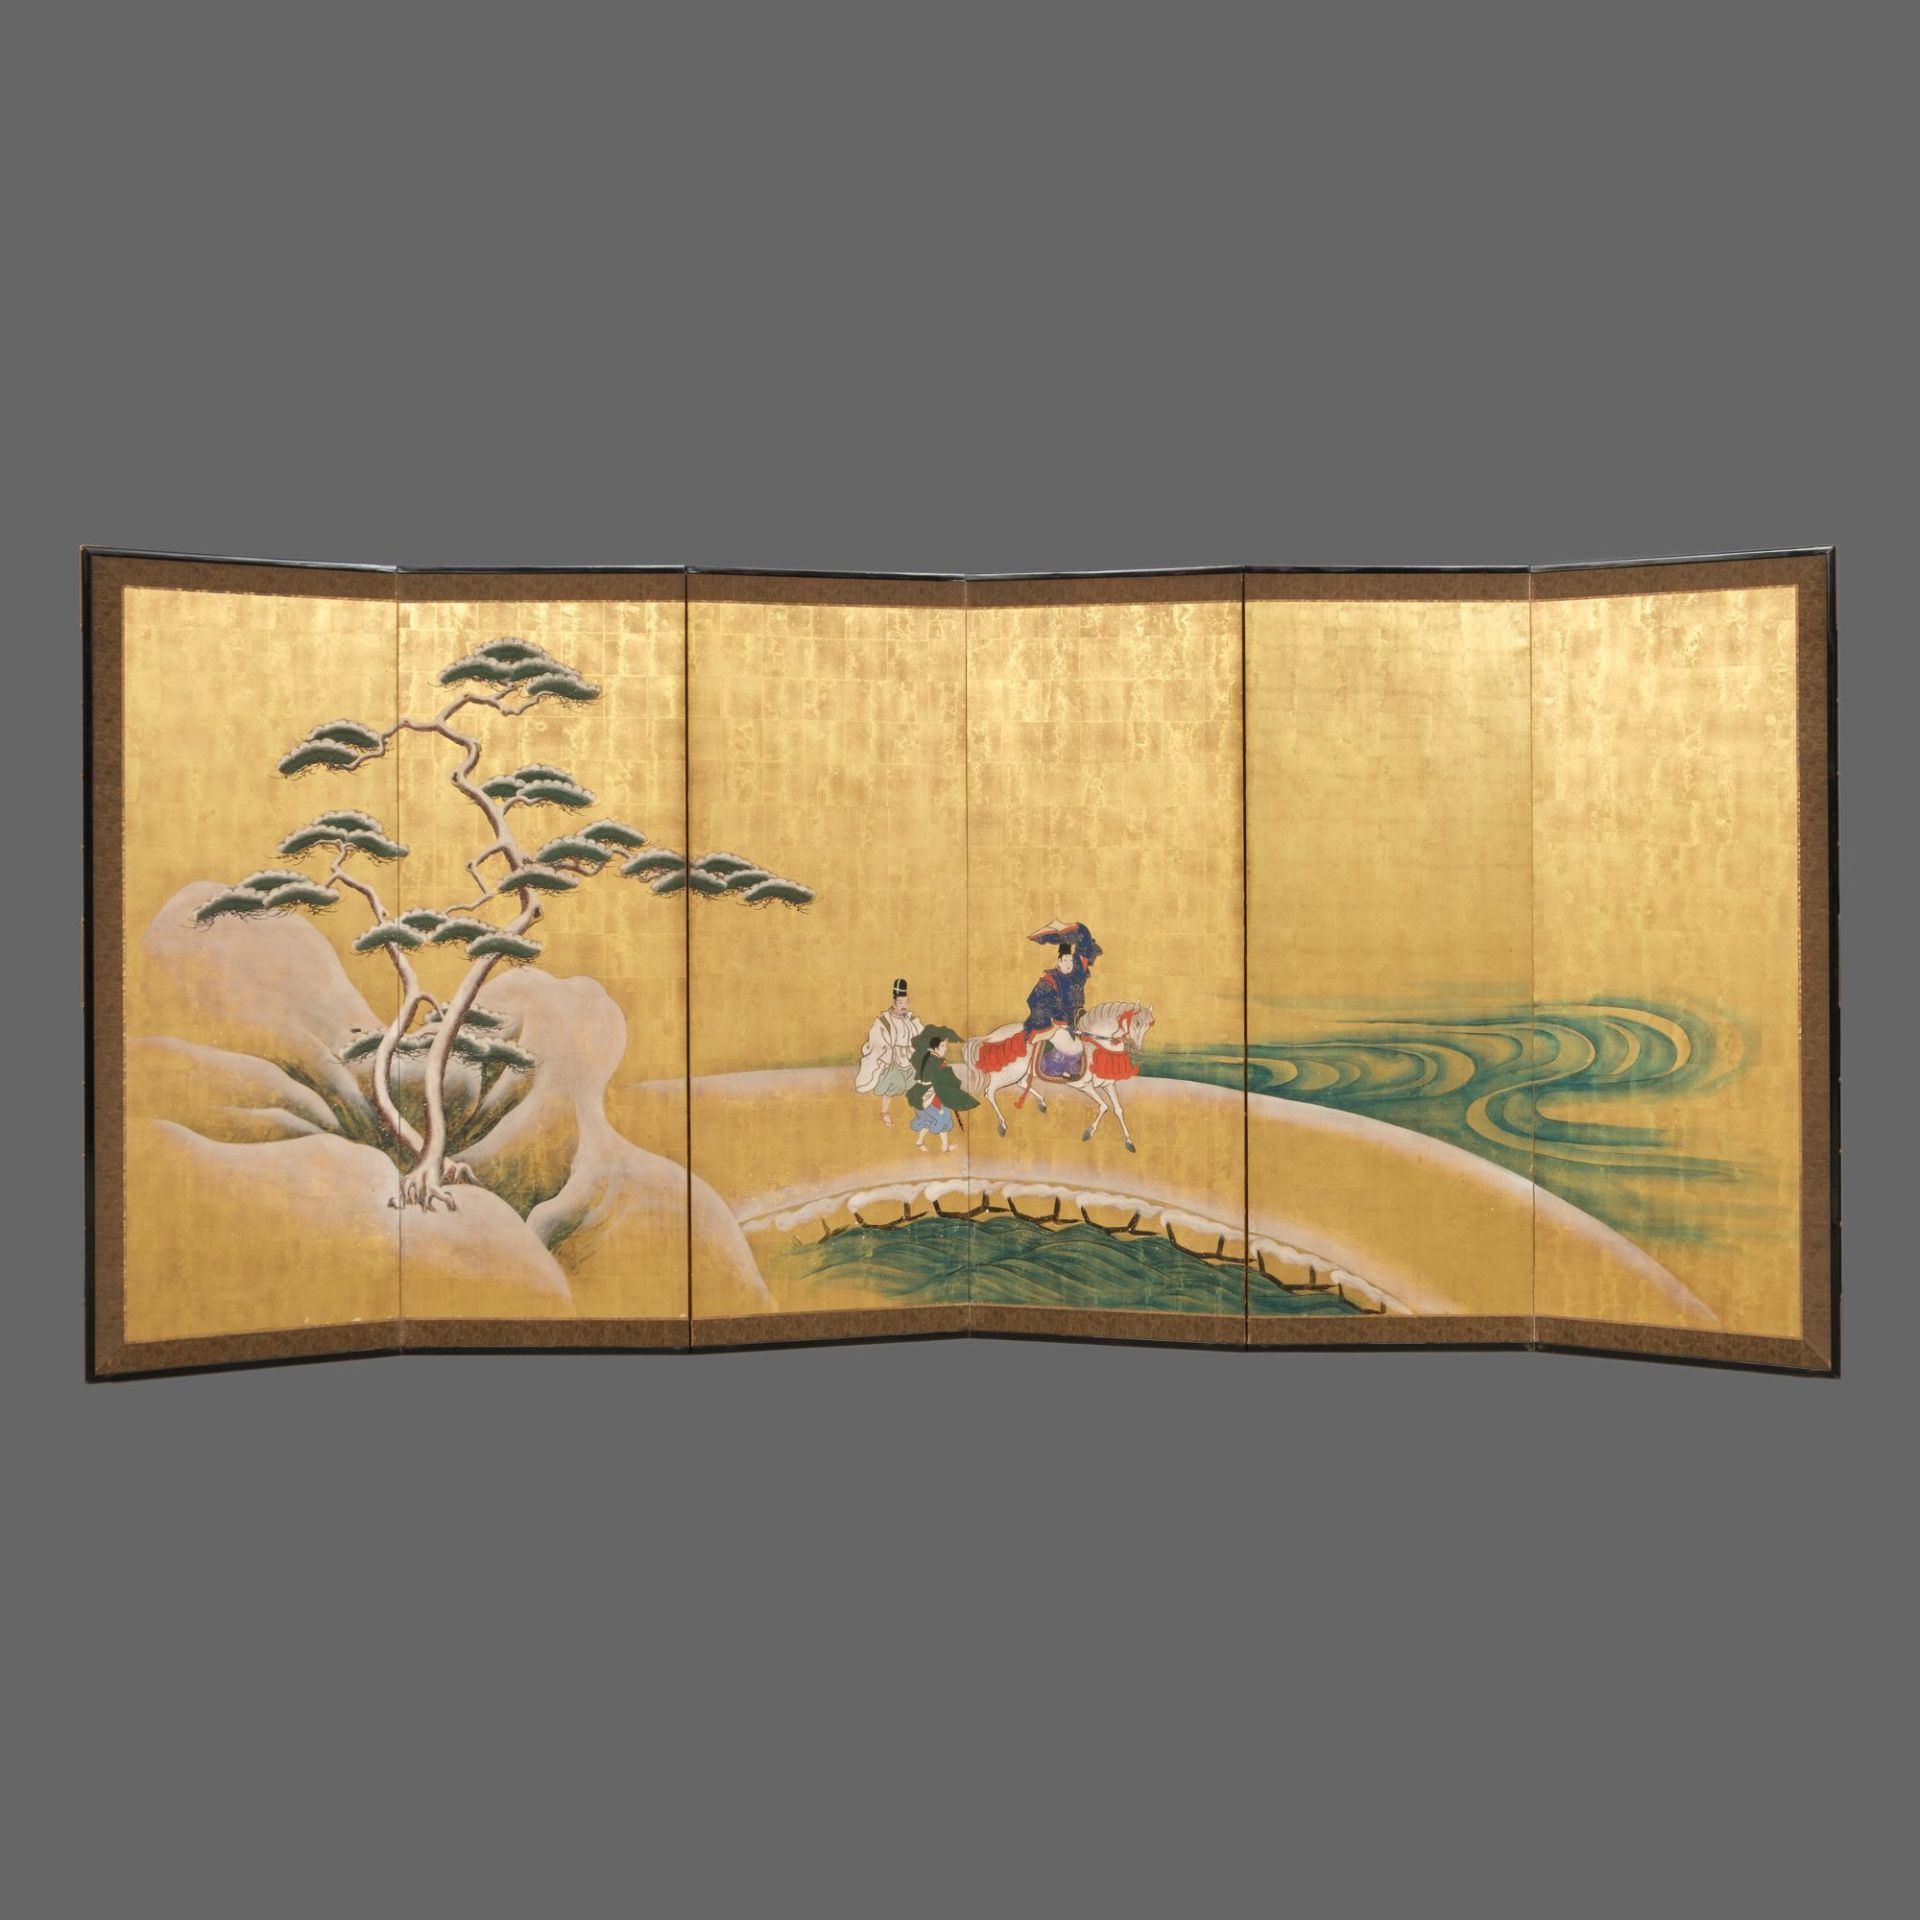 A LARGE JAPANESE 6-PANEL BYÔBU (FOLDING SCREEN) WITH GENJI RIDING A HORSE, LATE 18TH-EARLY 19TH CENT